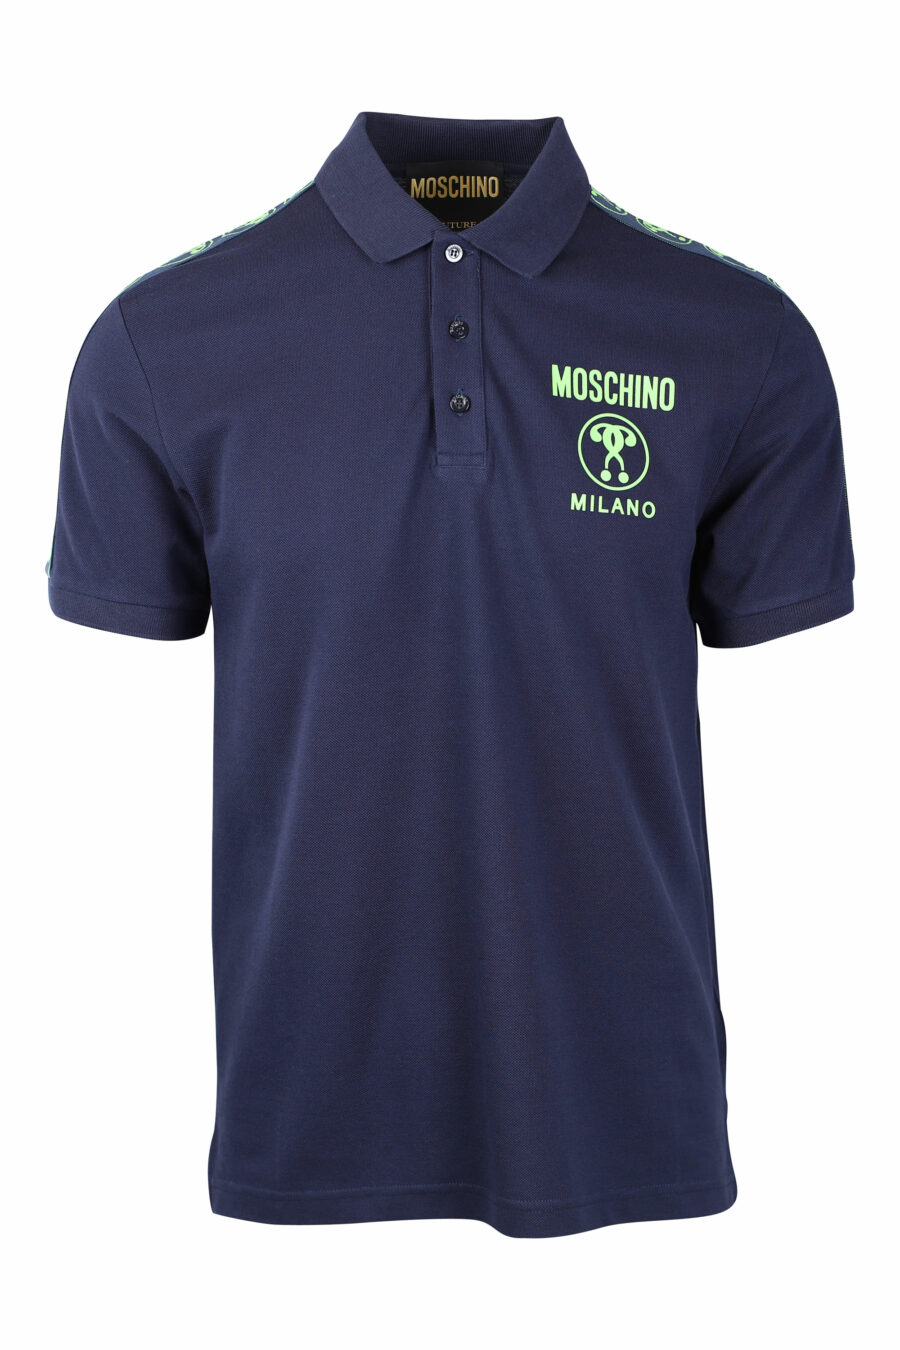 Dark blue polo shirt with double minilogue question and green shoulder logo - IMG 1451